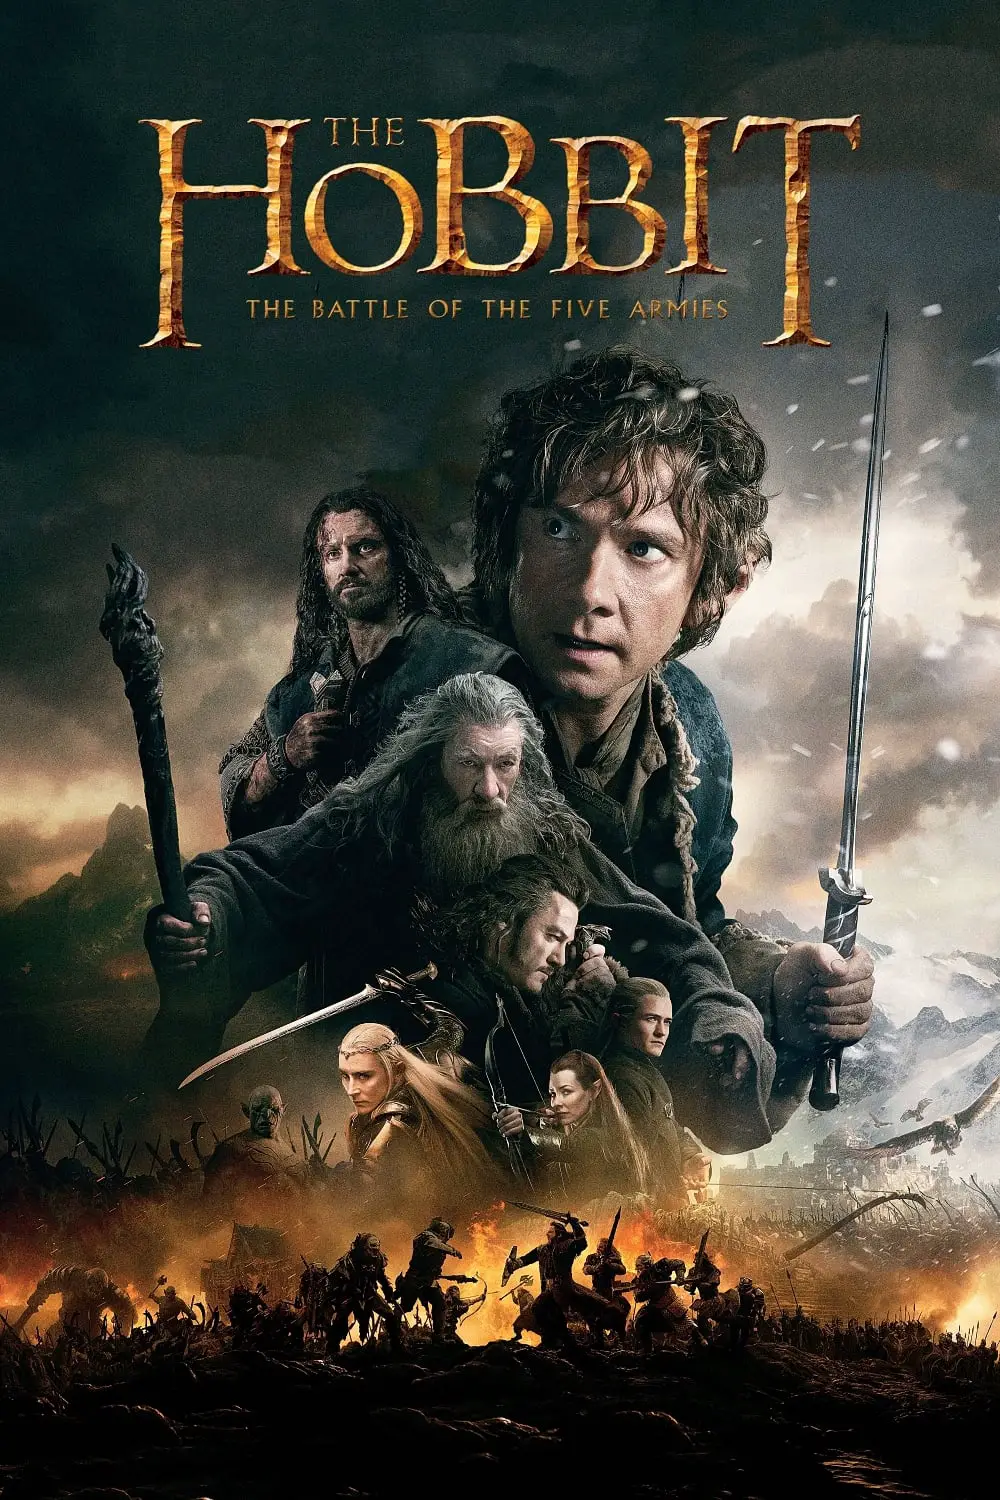 You are currently viewing The Hobbit: The Battle of the Five Armies